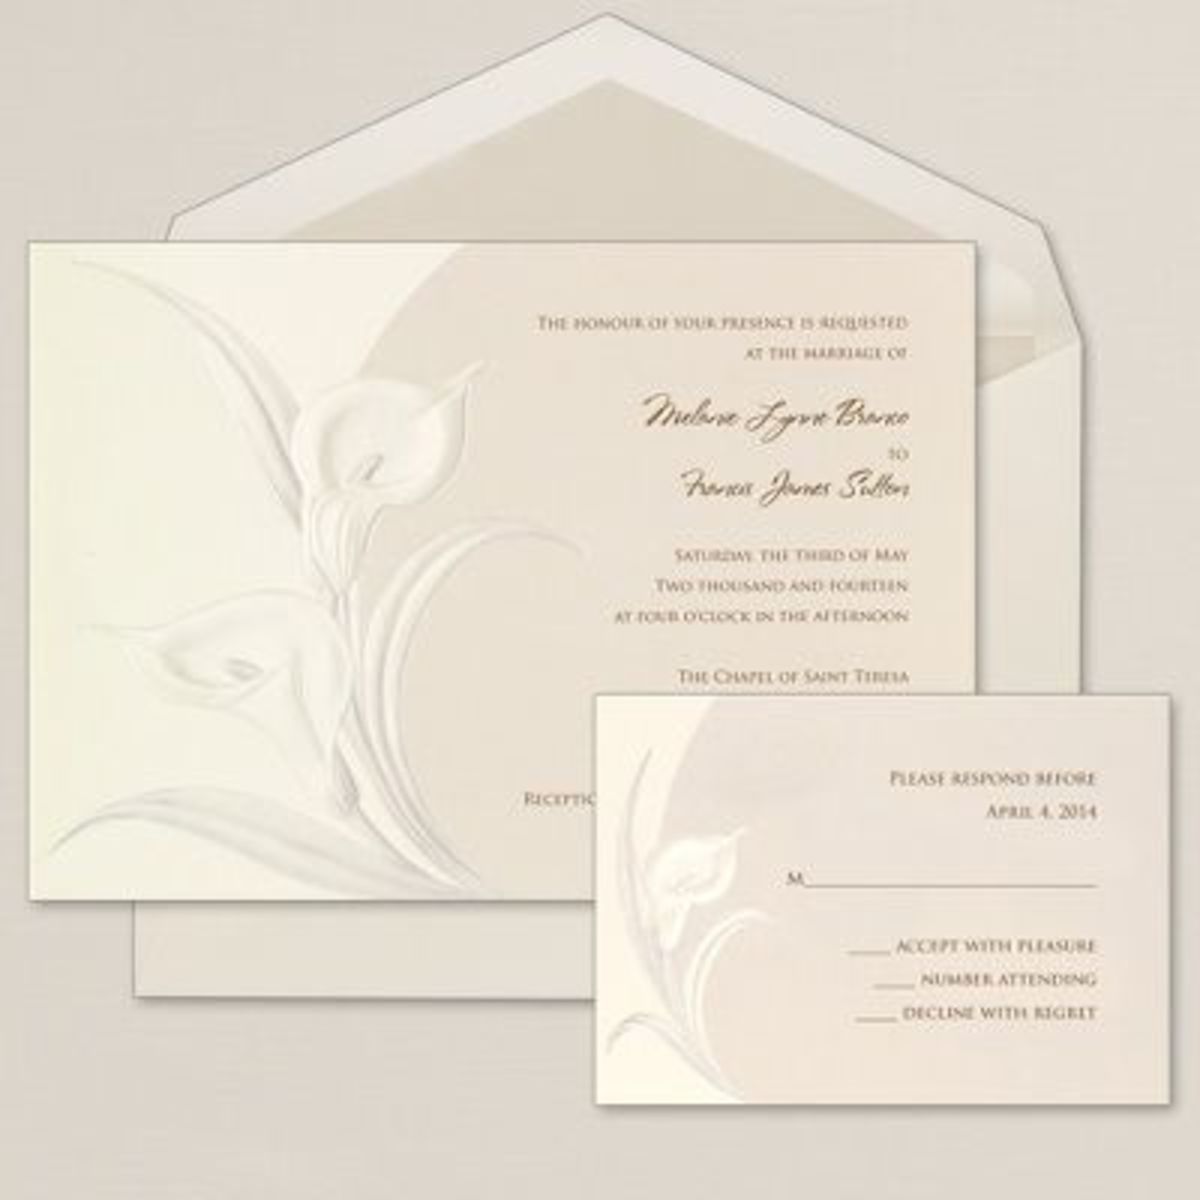 Your invitations should express your theme in an elegant simple way